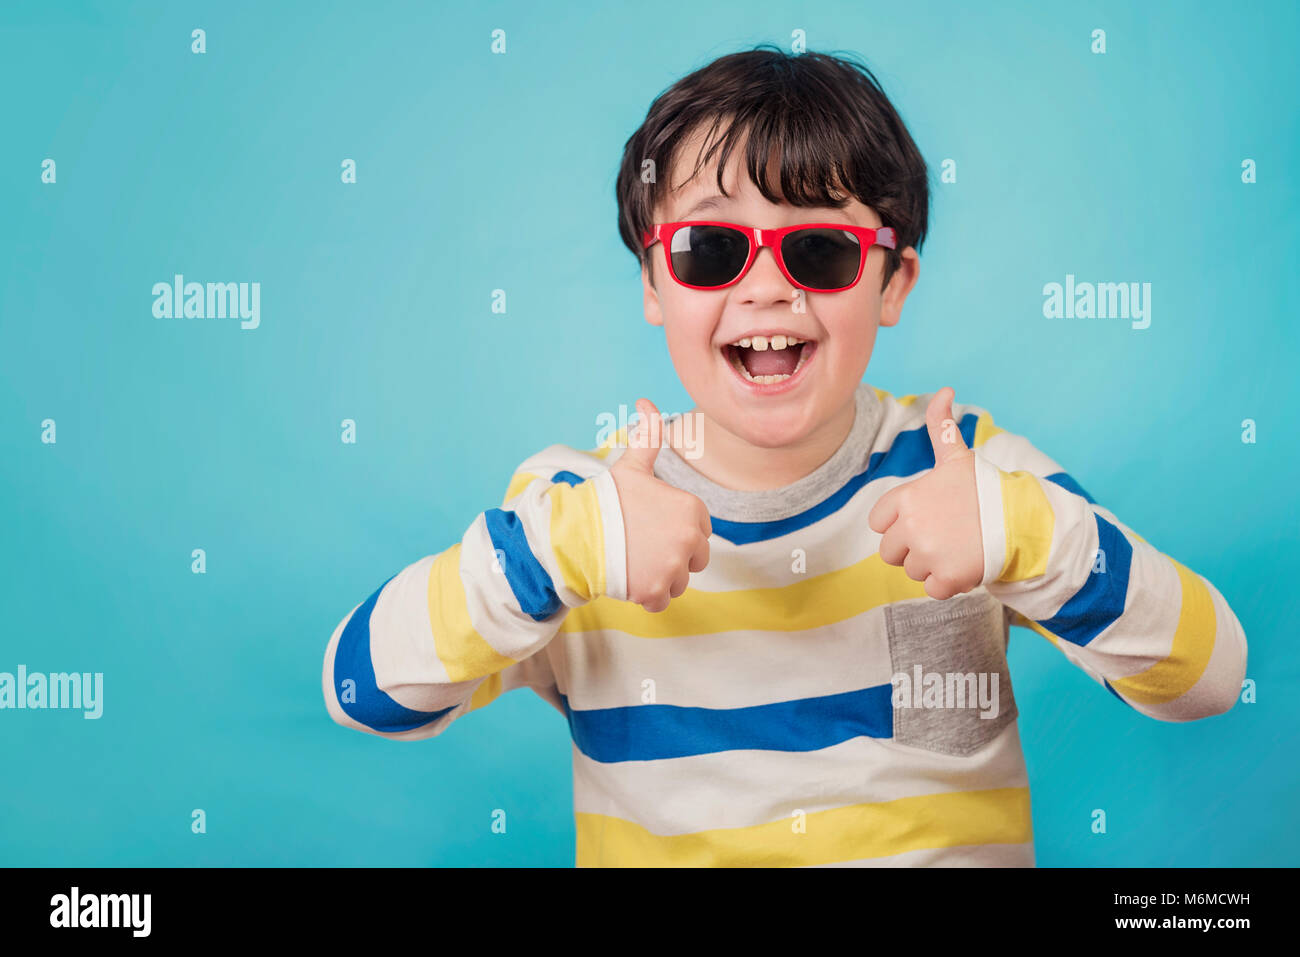 happy boy with sunglasses on blue background Stock Photo